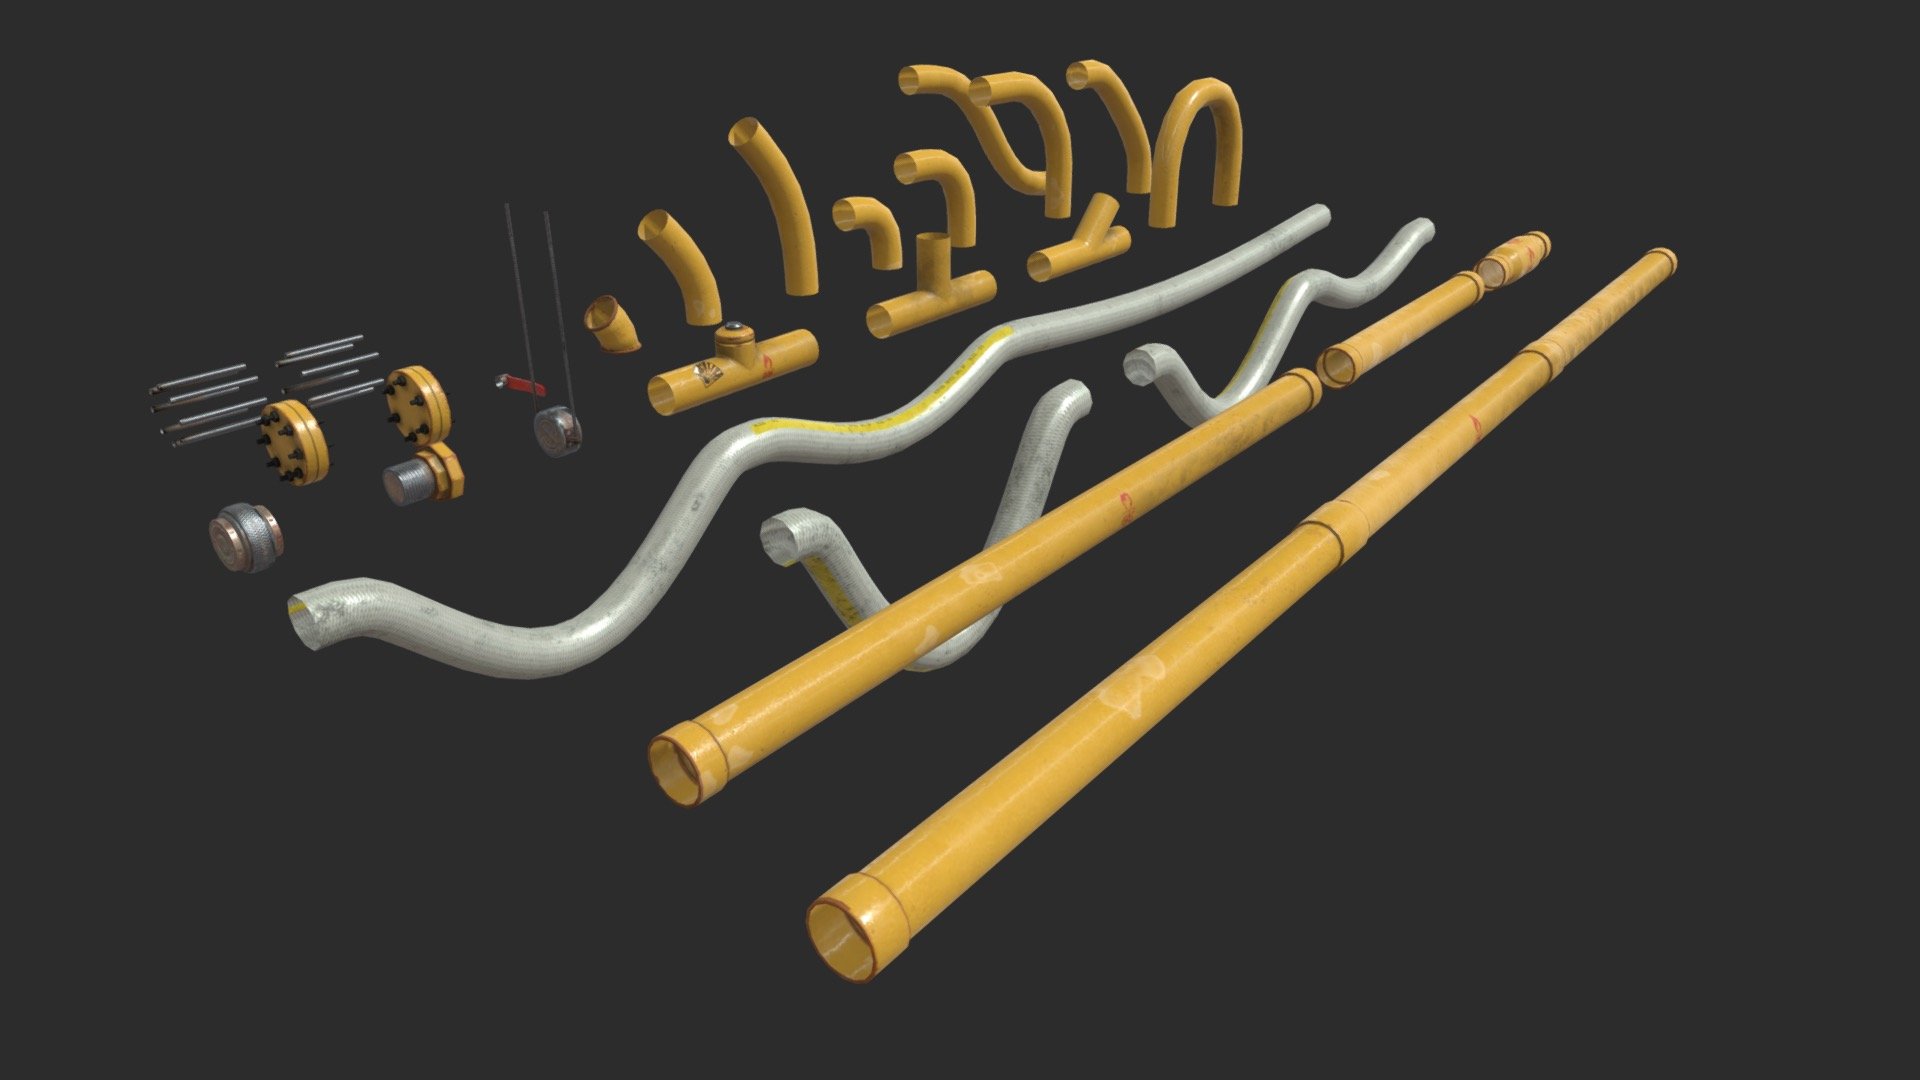 This modular pipes asset pack including 27 individual set Ø10 pipes with 4 LODs and colliders to get a good optimization. All elements can easily be positioned together by moving in 10cm increments. Also, this pack includes 37 pre-assembled sets to allow you to speed up your assemblies. 



INDIVIDUAL SETS INCLUDE :




4 elbow 90°

3 elbow 45°

1 U pipe

1 S pipe

2 T pipes

1 Y pipe

4 straight pipes

3 flexible pipes

2 screw joints

1 mounting bracket

1 handle valve

2 end of pipes

2 threaded rod sets

SPECIFICATIONS




Objects : 64

Polygons : 4975

GAME SPECS




LODs : Yes (inside FBX for Unity &amp; Unreal)

Numbers of LODs : 4

Collider : Yes

Lightmap UV : No

EXPORTED FORMATS




FBX

Collada

OBJ

TEXTURES




Materials in scene : 1

Textures sizes : 4K

Textures types : Base Color, Metallic, Roughness, Normal (DirectX &amp; OpenGL), Heigh &amp; AO (also Unity &amp; Unreal workflow maps)

Textures format : TGA &amp; PNG
 - Modular Pipes - Gas Pipeline - Buy Royalty Free 3D model by KangaroOz 3D (@KangaroOz-3D) 3d model